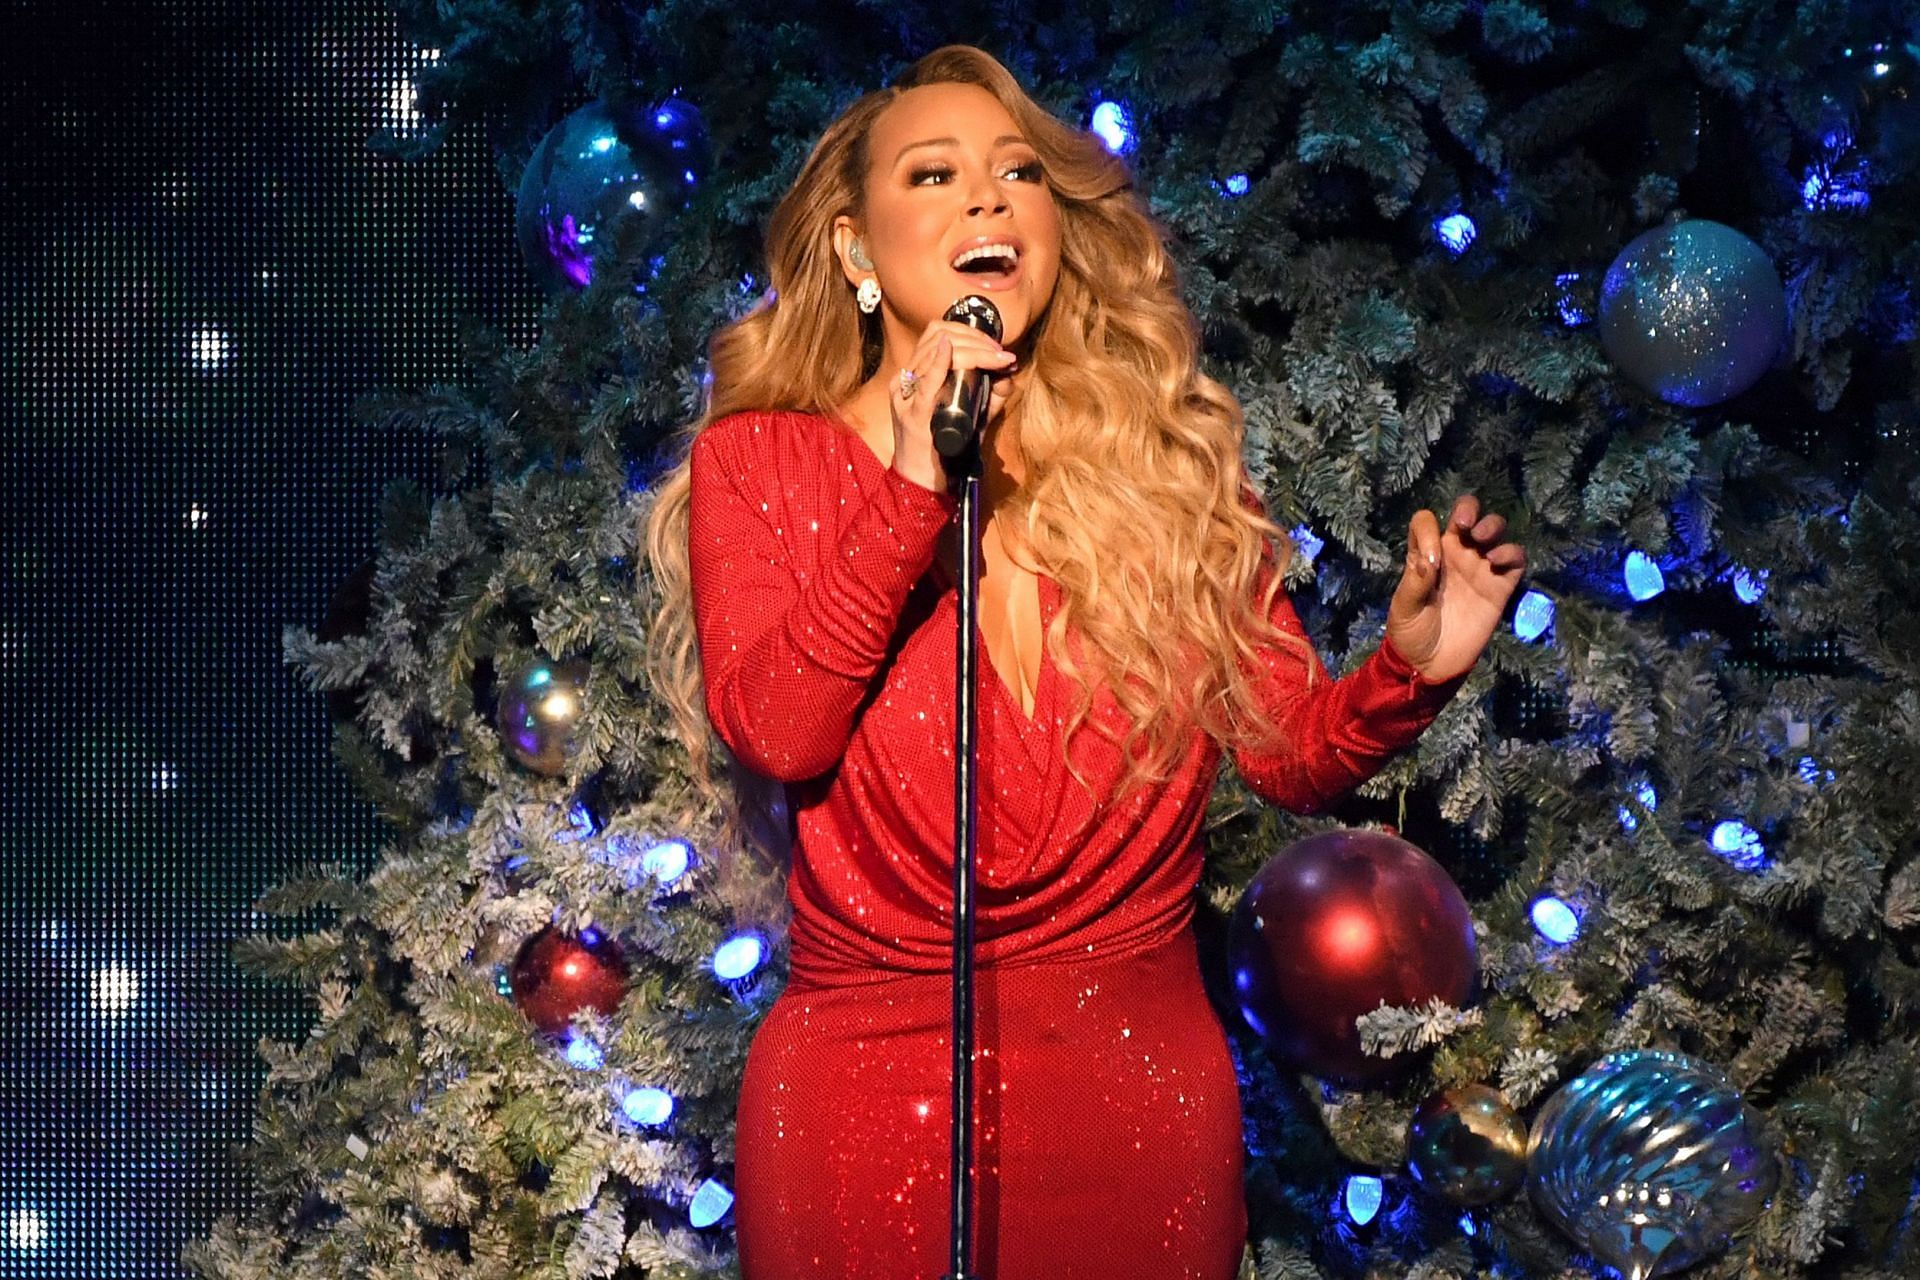 Carey performs on her Christmas tour in 2019 (image via Getty/Kevin Mazur)